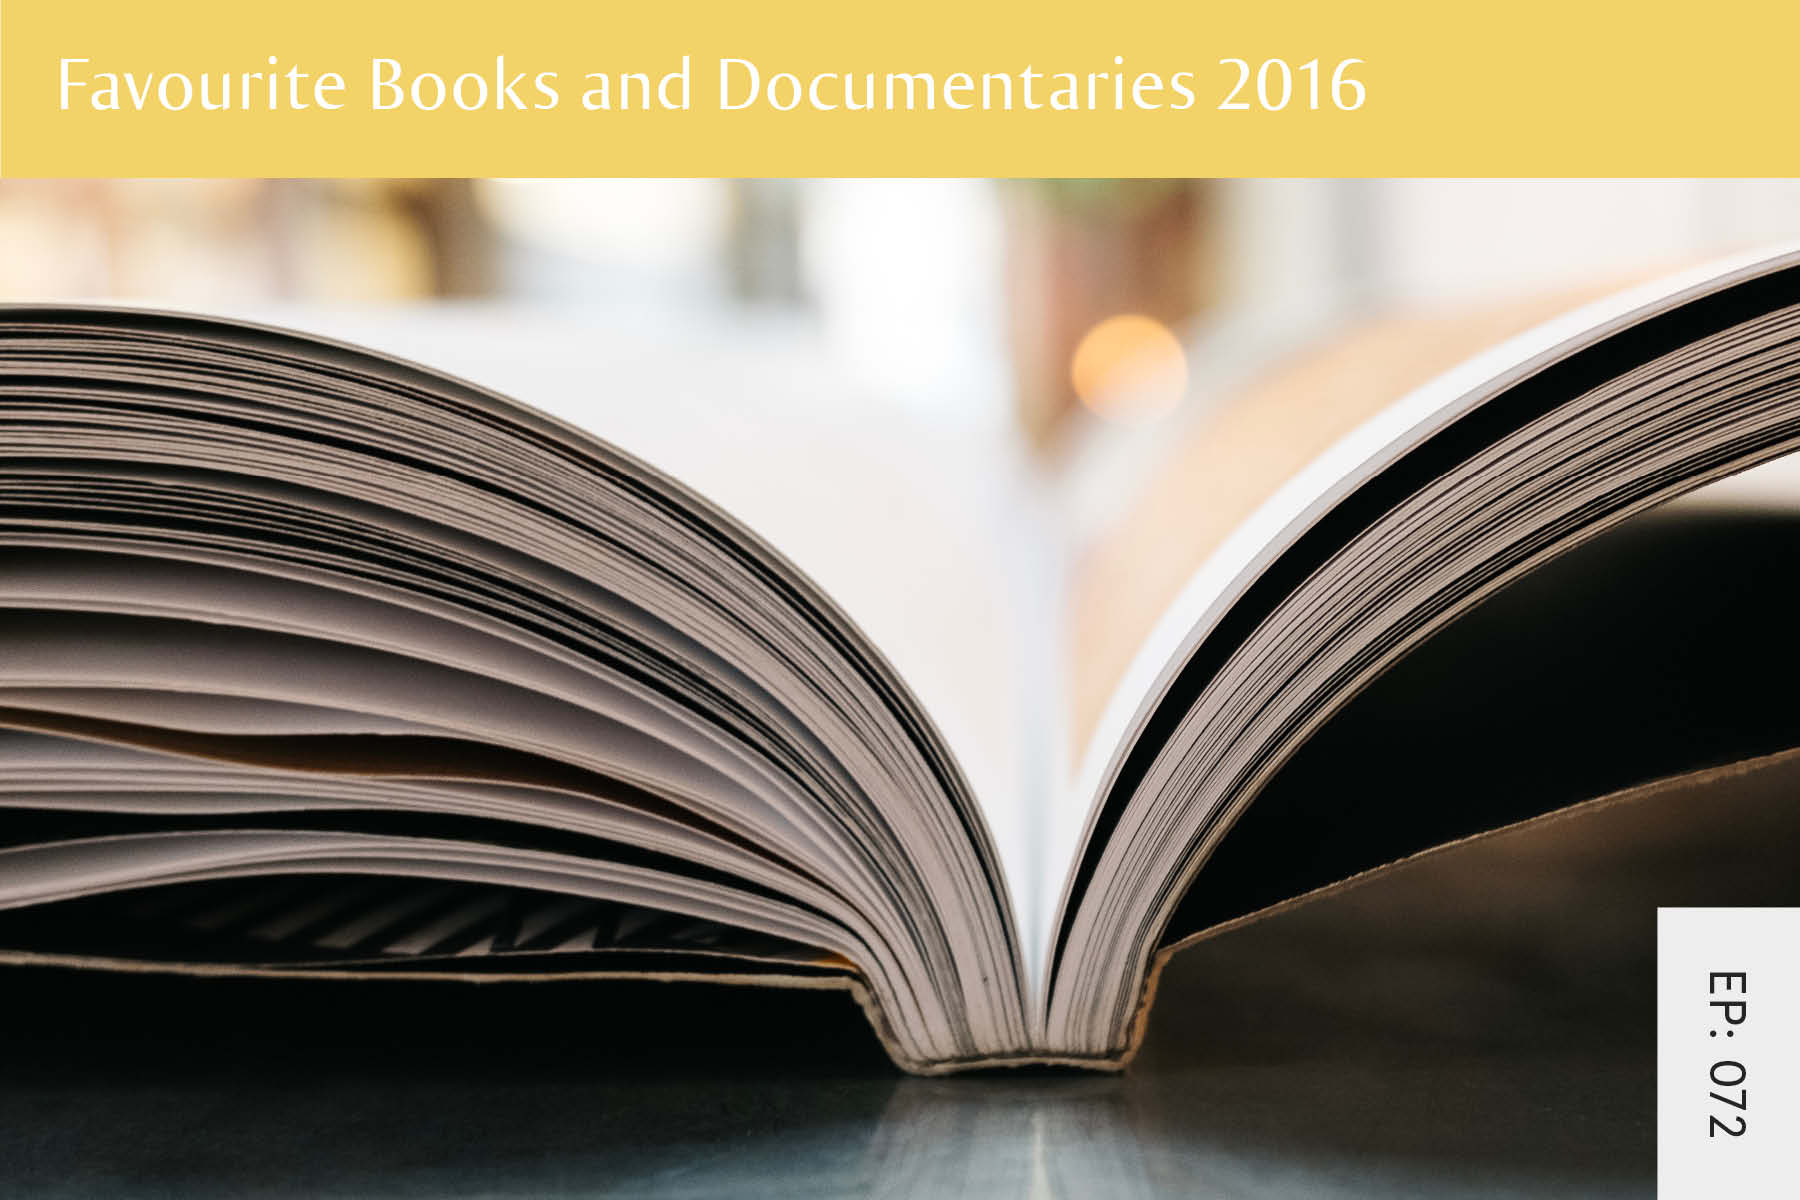 072: Favourite Books and Documentaries 2016 - Seven Health: Eating Disorder Recovery and Anti Diet Nutritionist